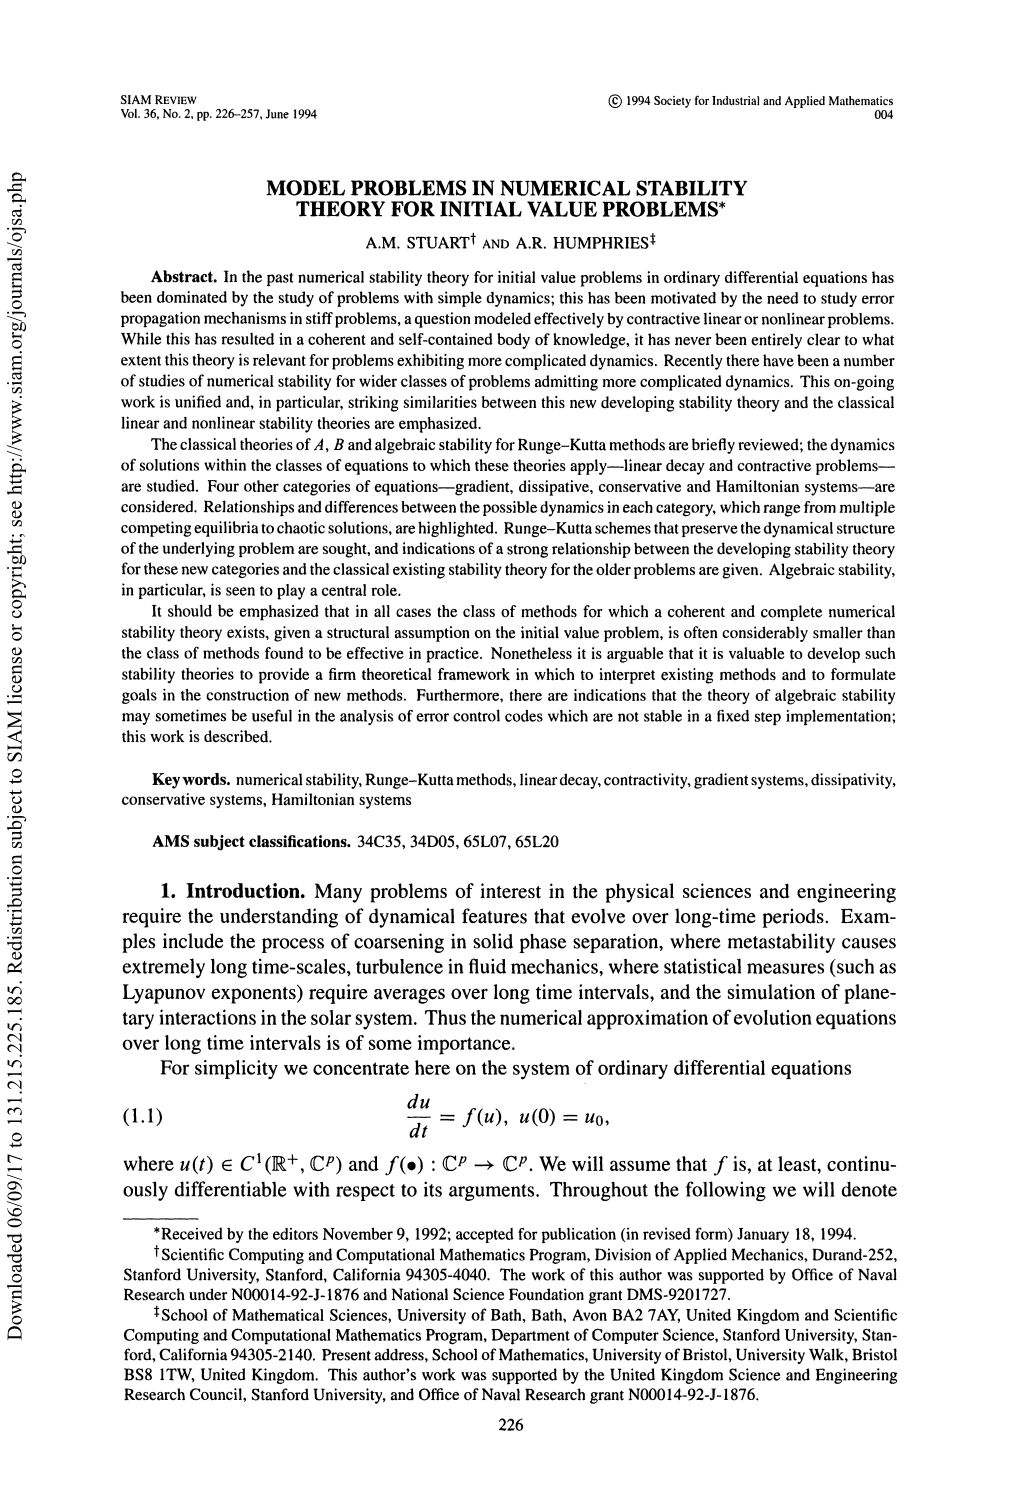 Model Problems in Numerical Stability Theory for Initial Value Problems*